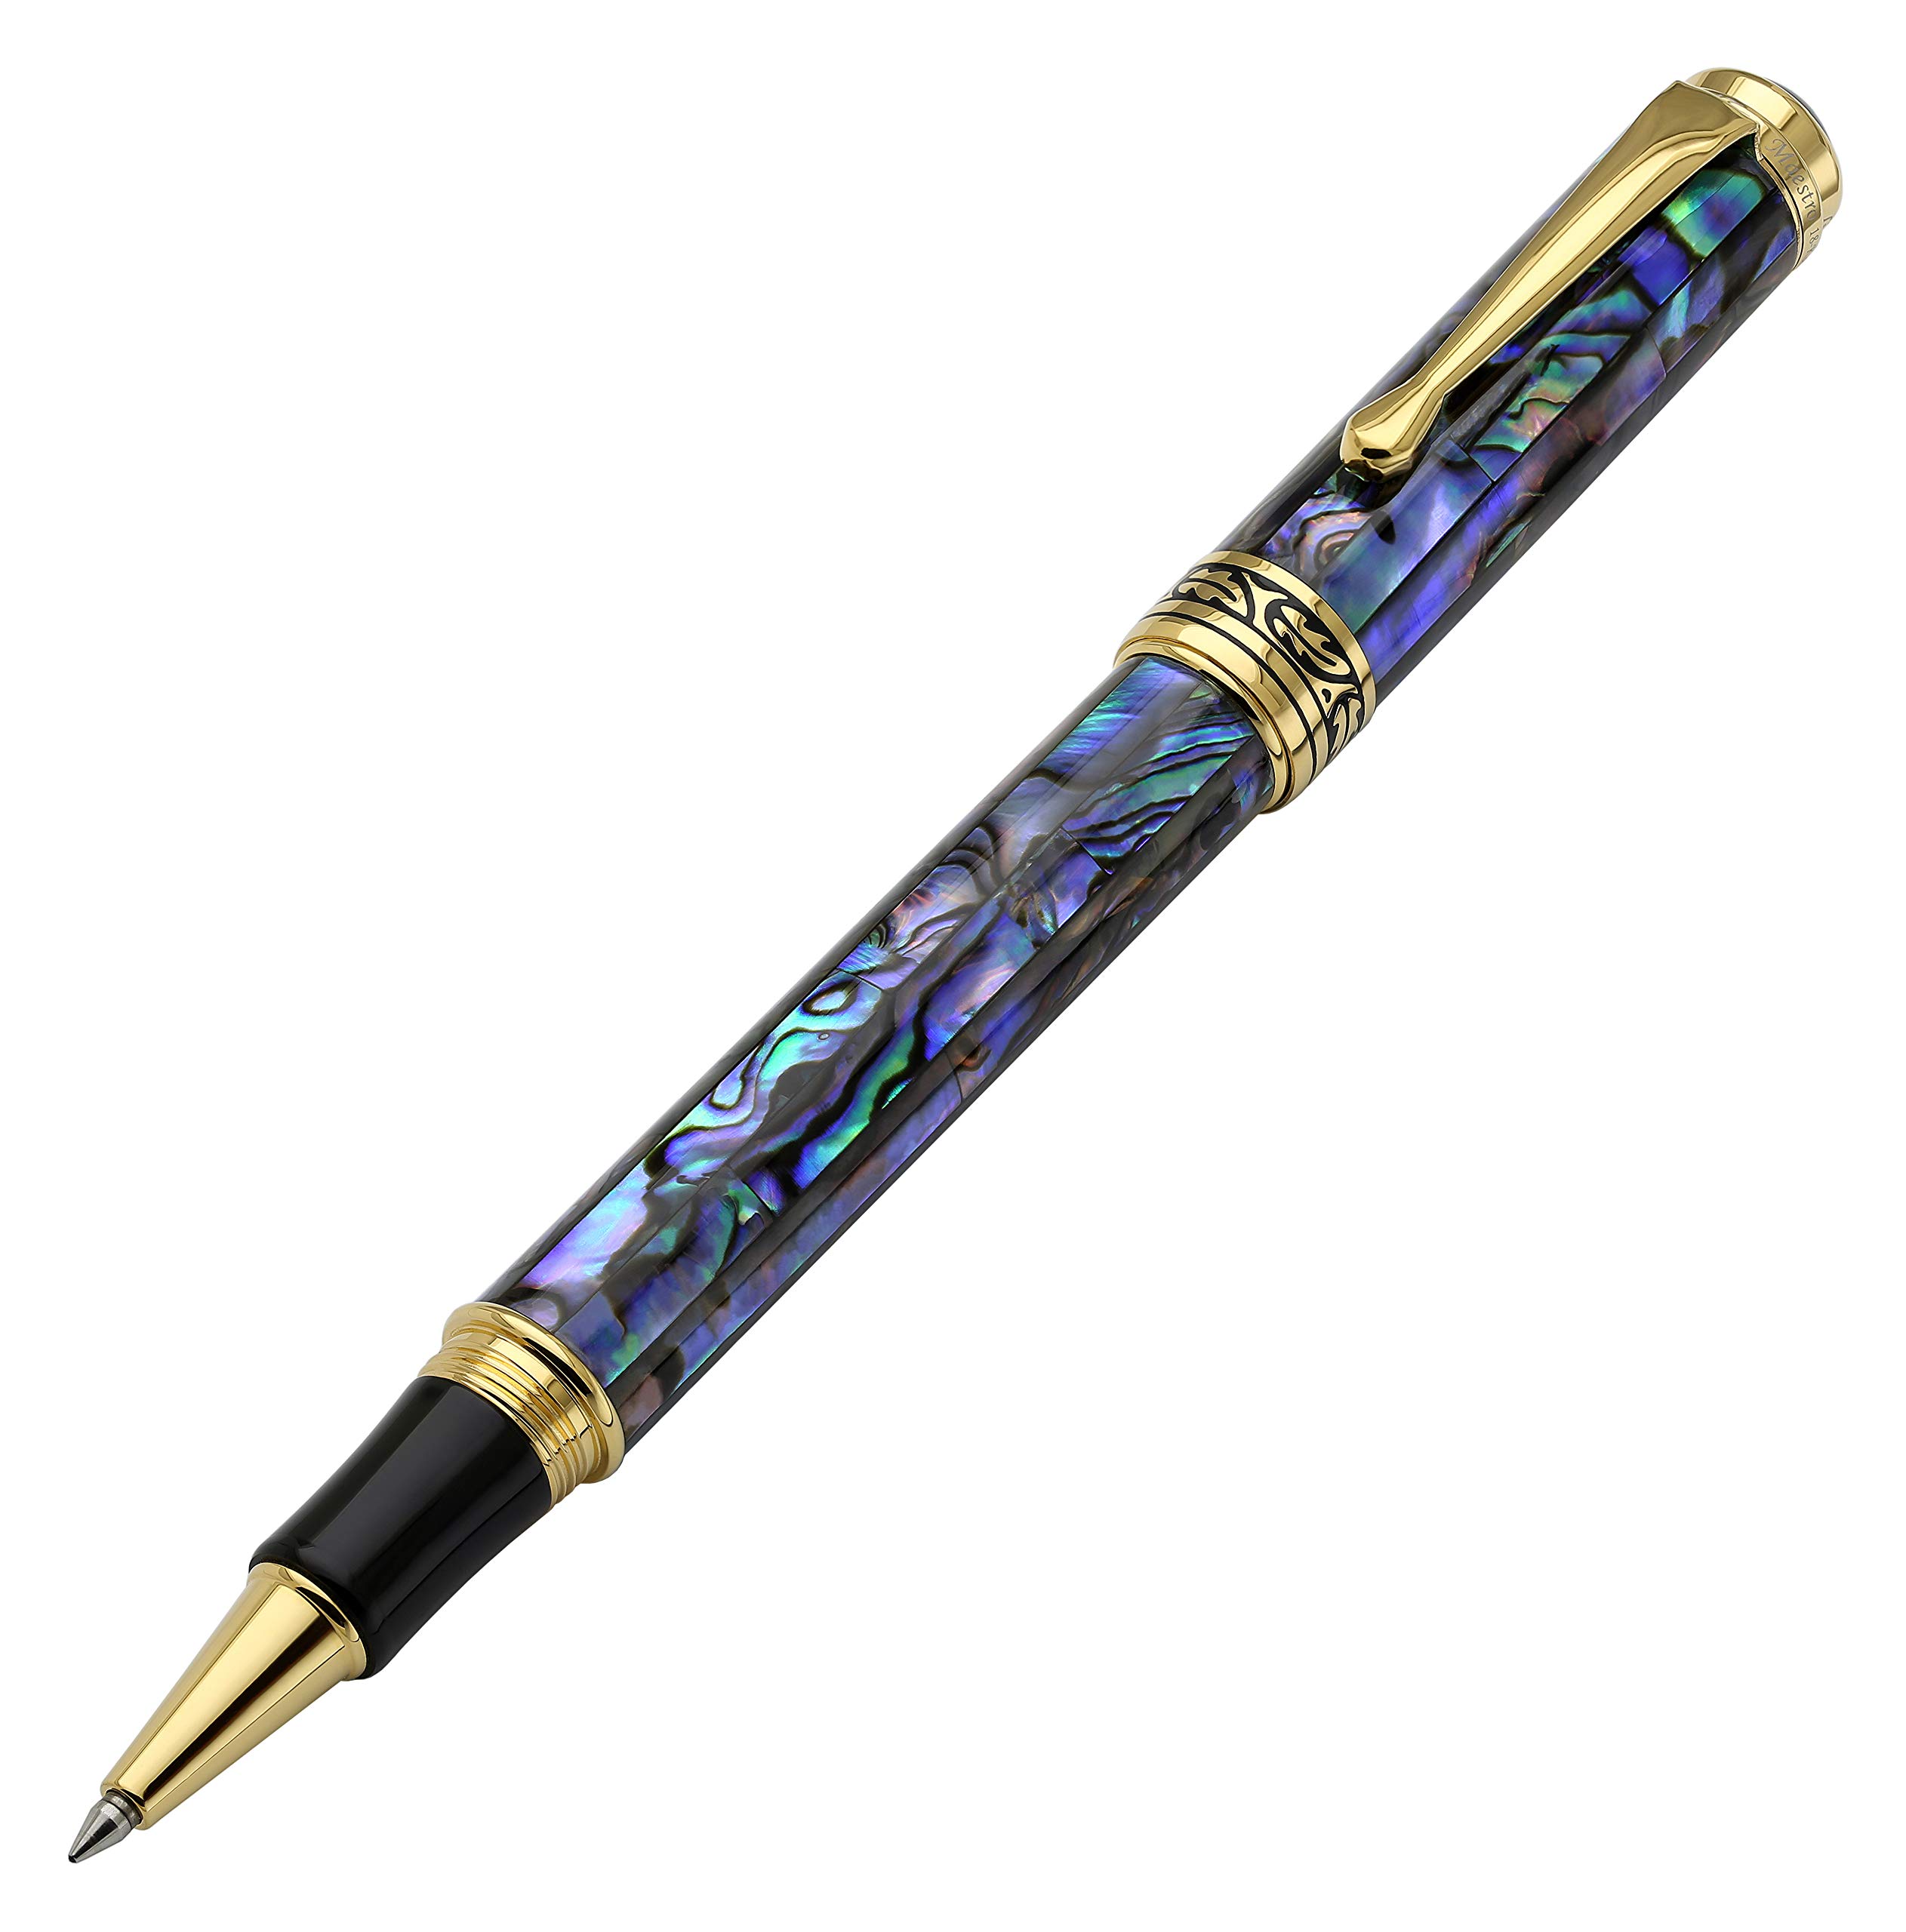 Xezo Maestro Fine Point Rollerball Pen, Iridescent Paua Sea Shell with 18 Karat Gold Plating. Handmade, Limited Edition, Serialized. No Two Alike